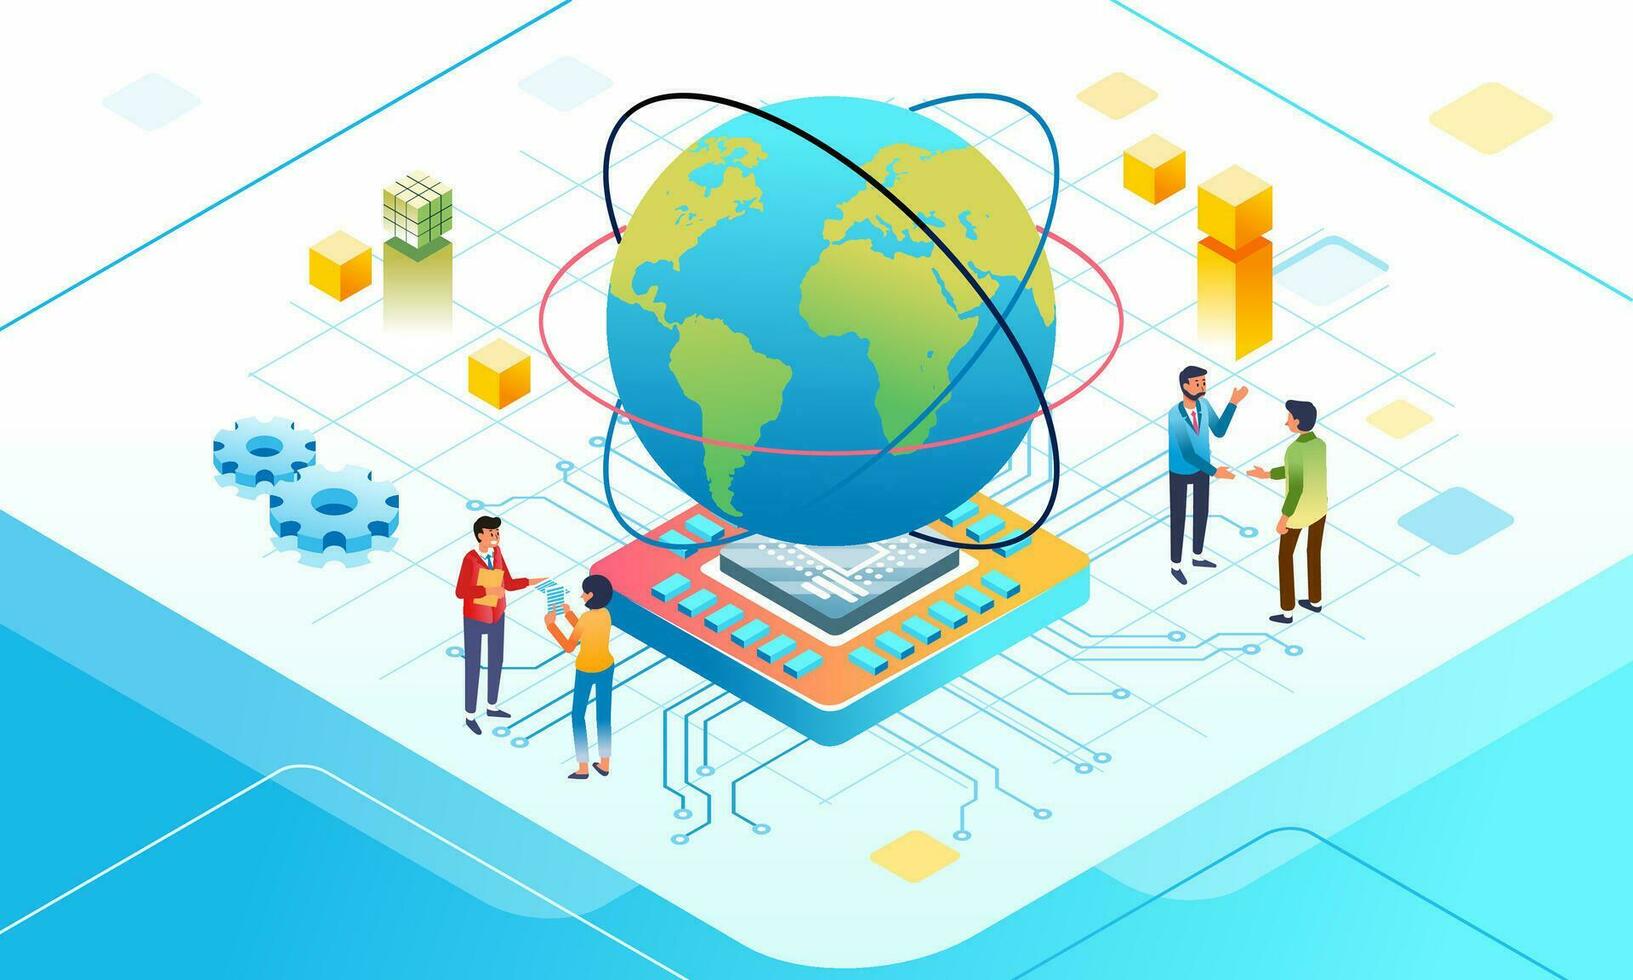 isometric illustration of Data communication and internet connectivity, big globe with chip board under and people talk to each other vector